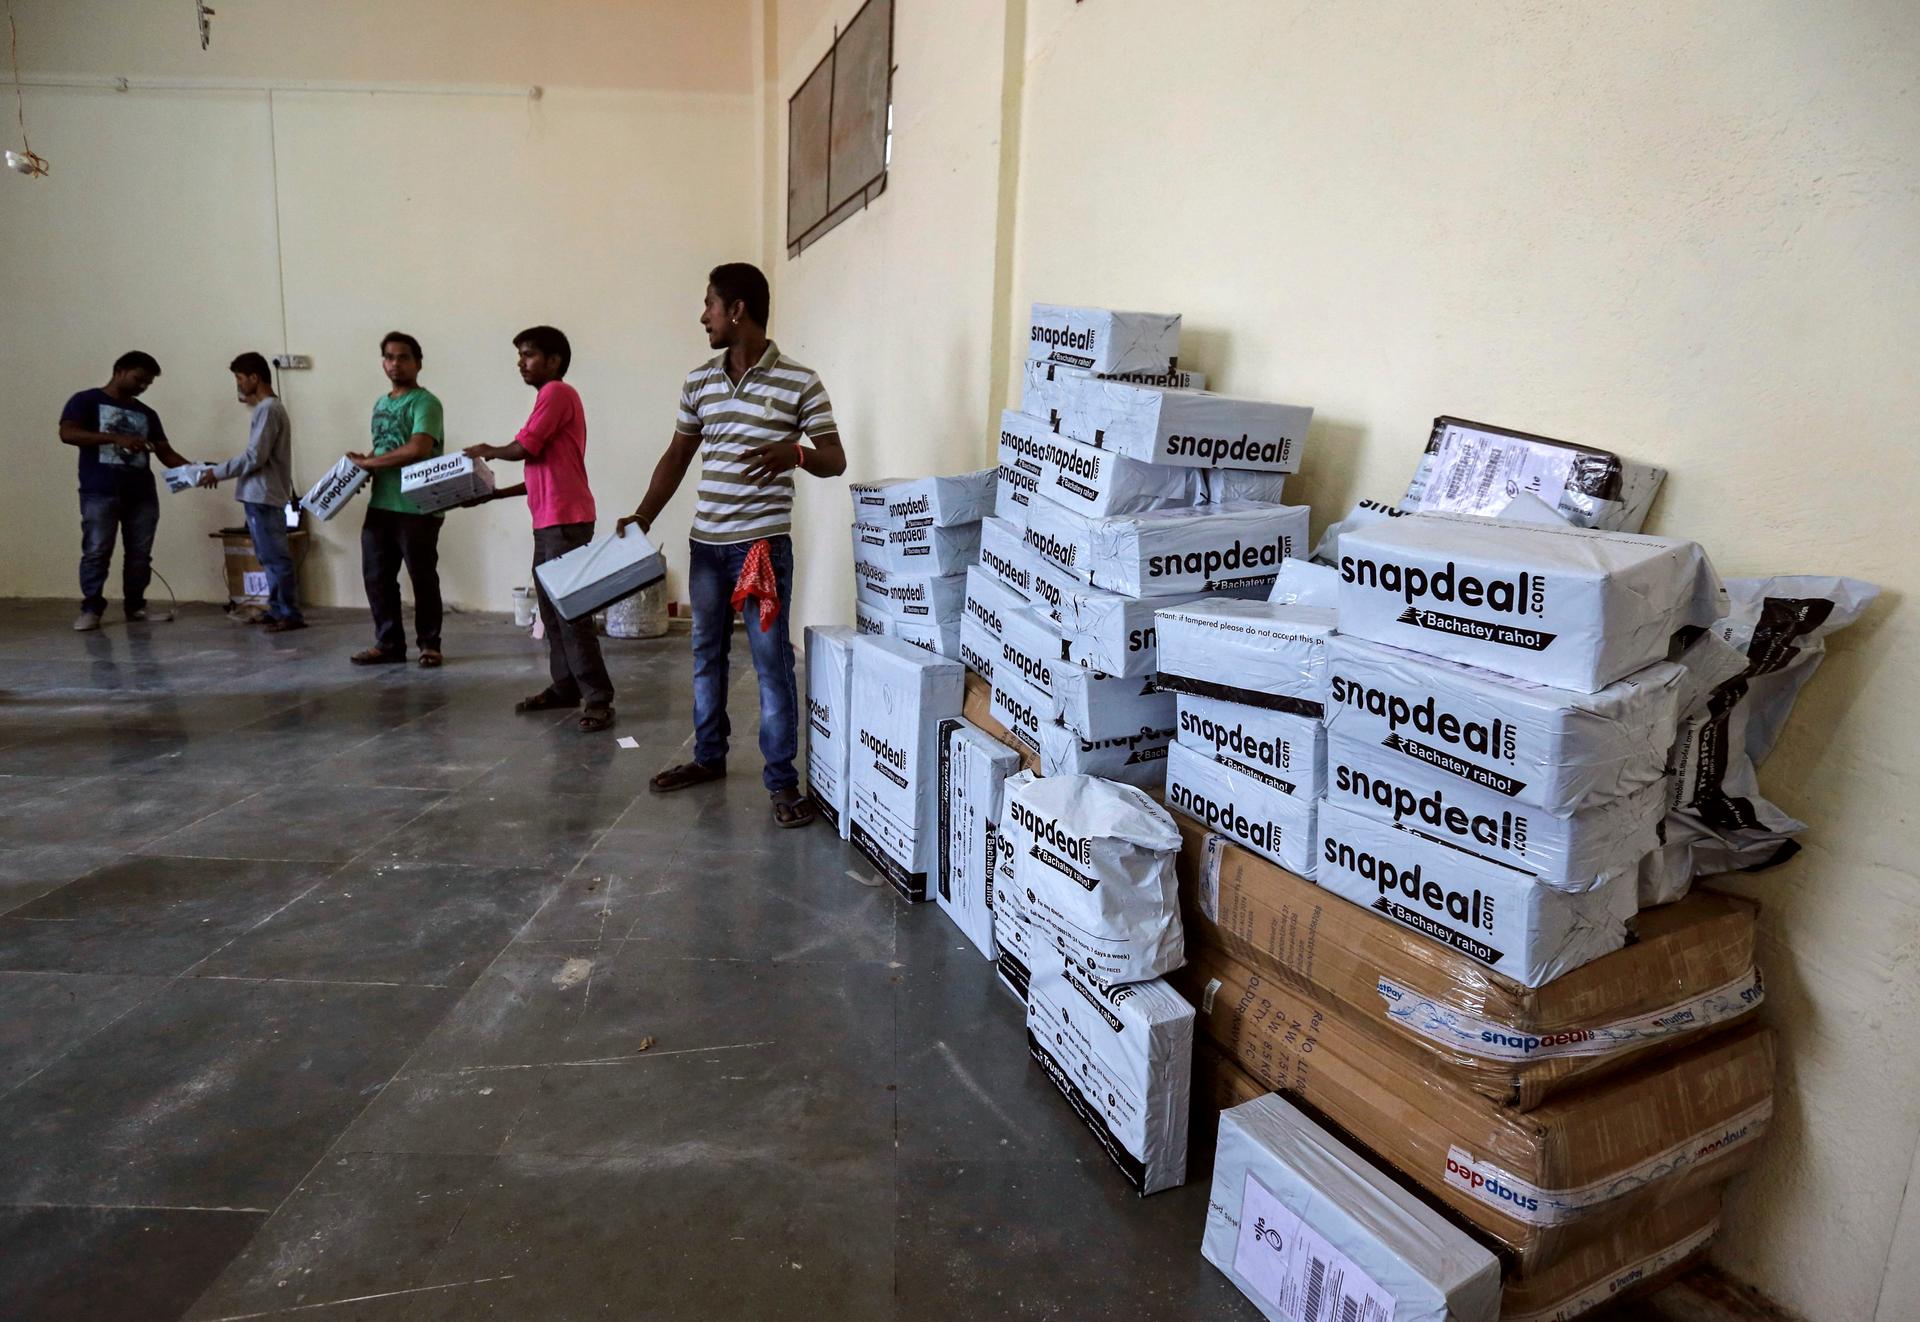 Employees of Snapdeal, an Indian online retailer, sort out delivery packages inside their company fulfillment center in Mumbai on October 22, 2014.